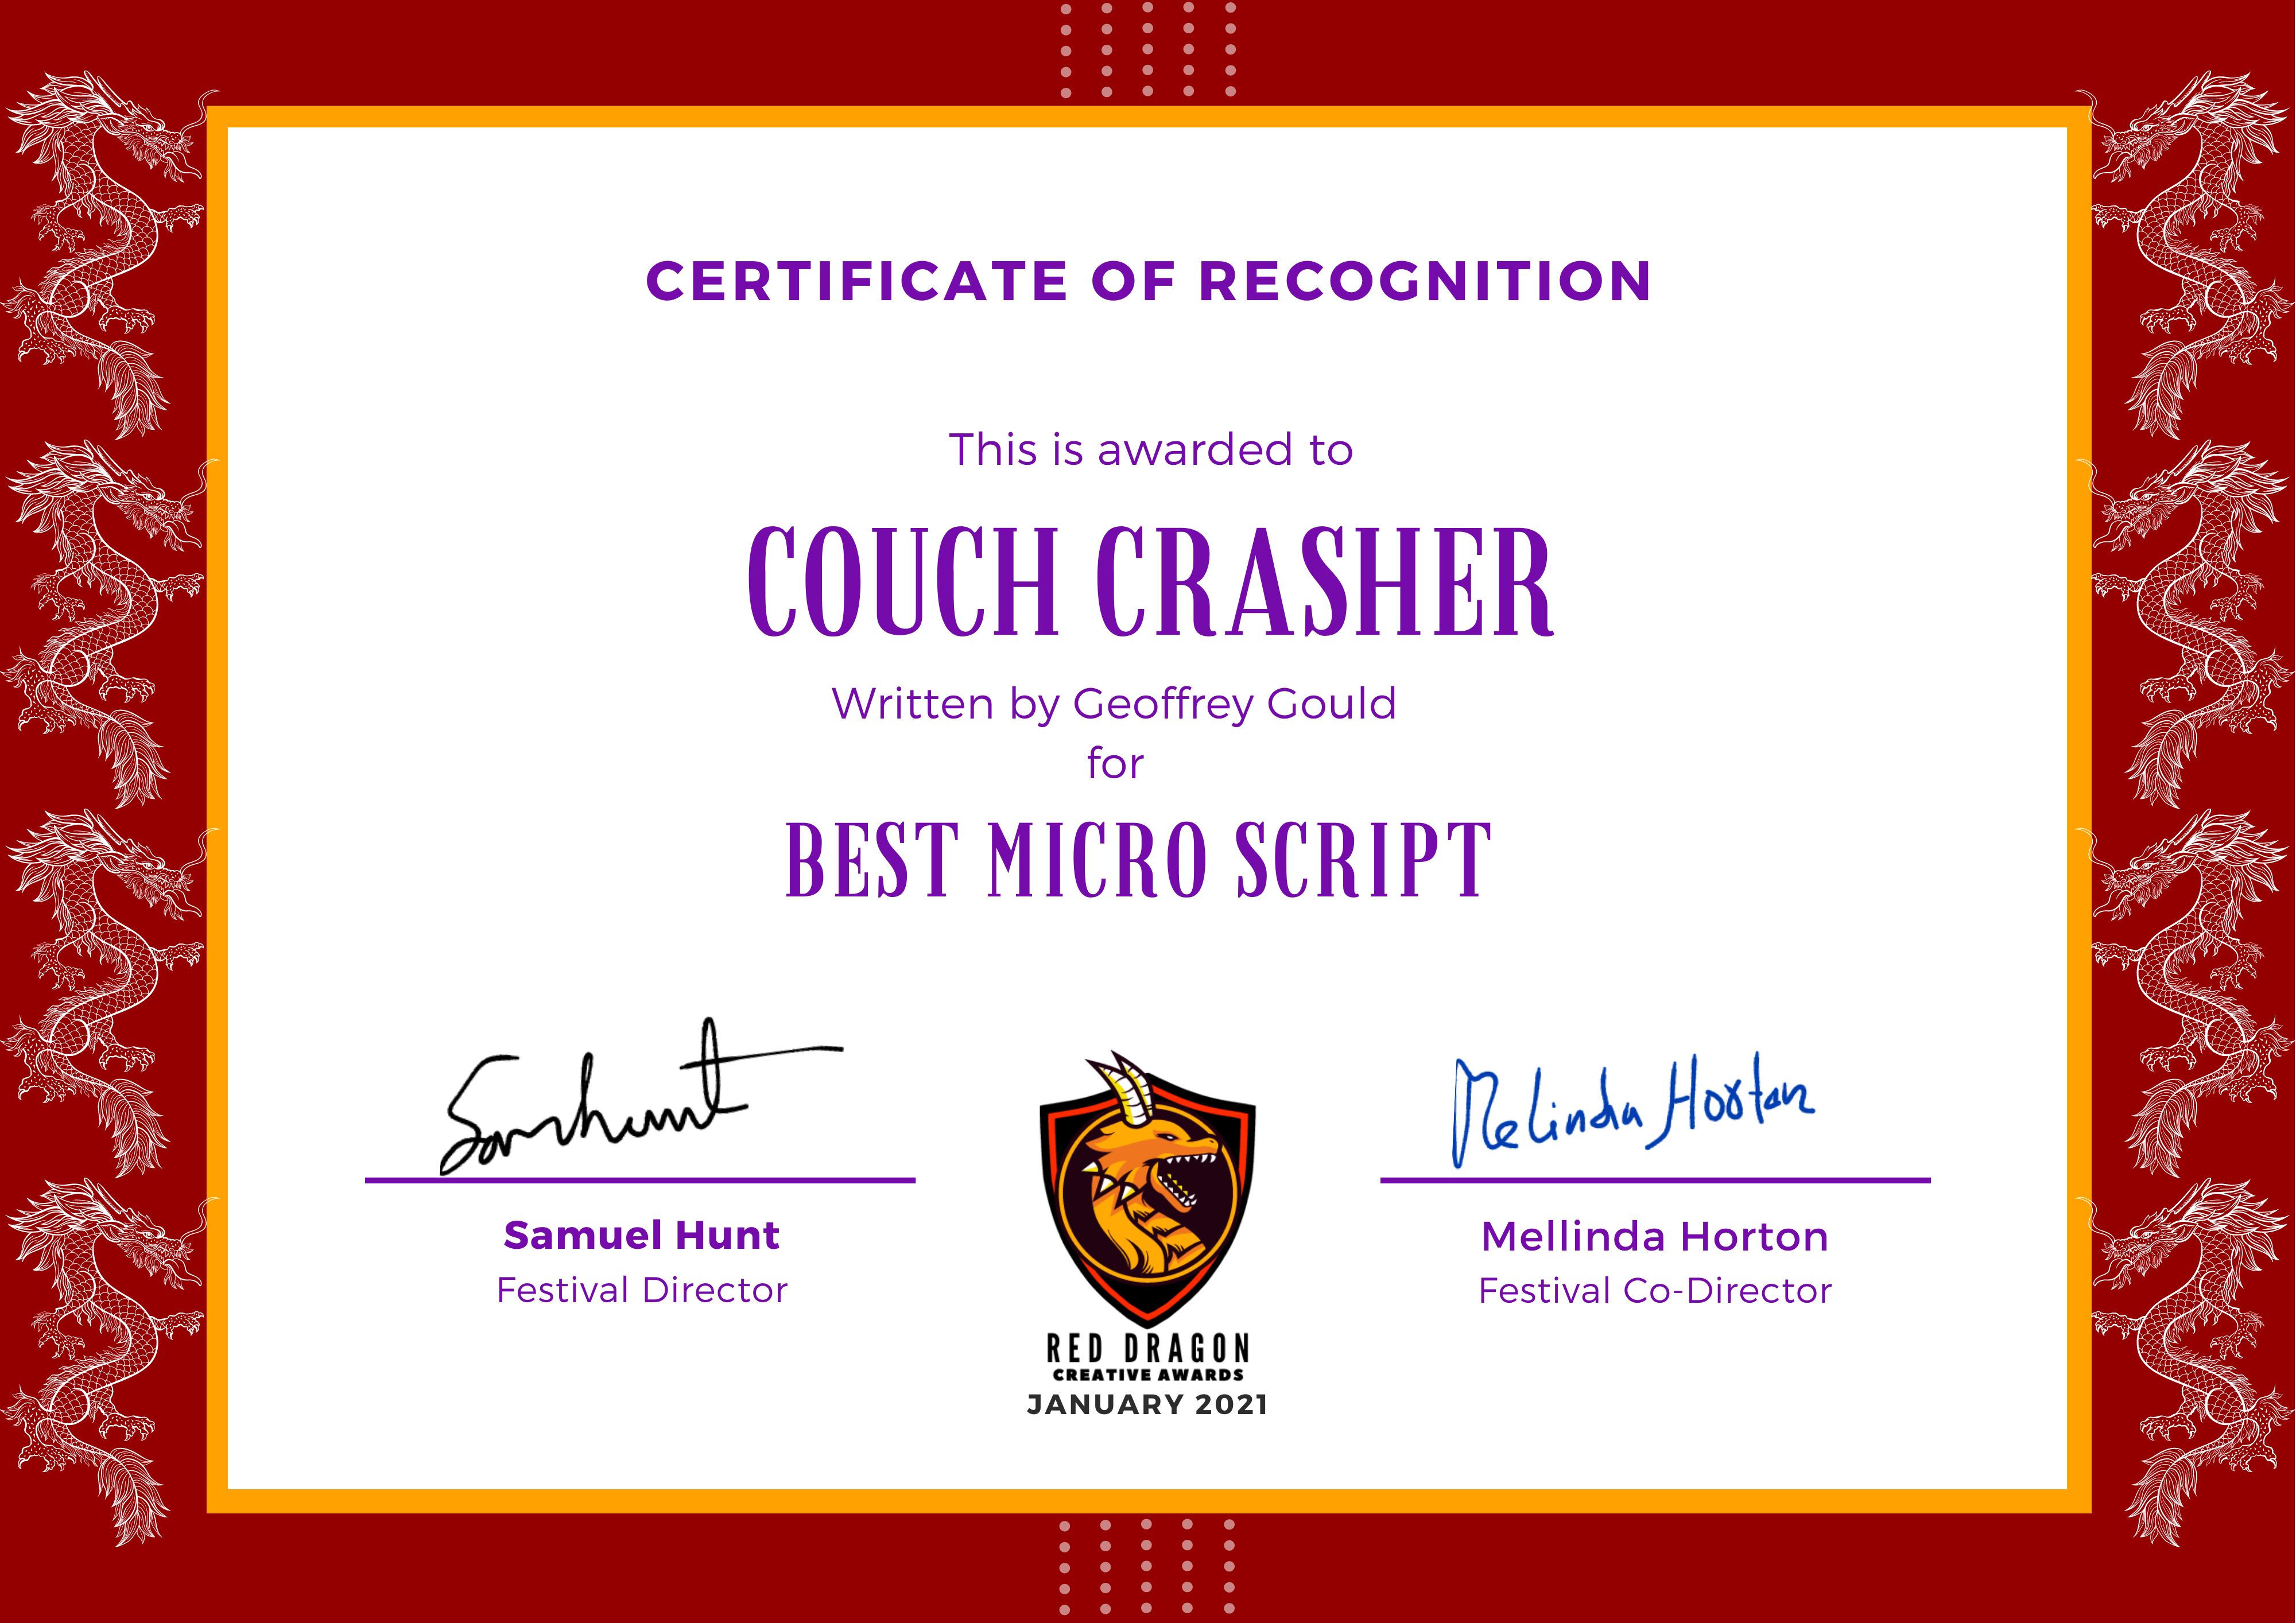 Couch Crasher Official Selection